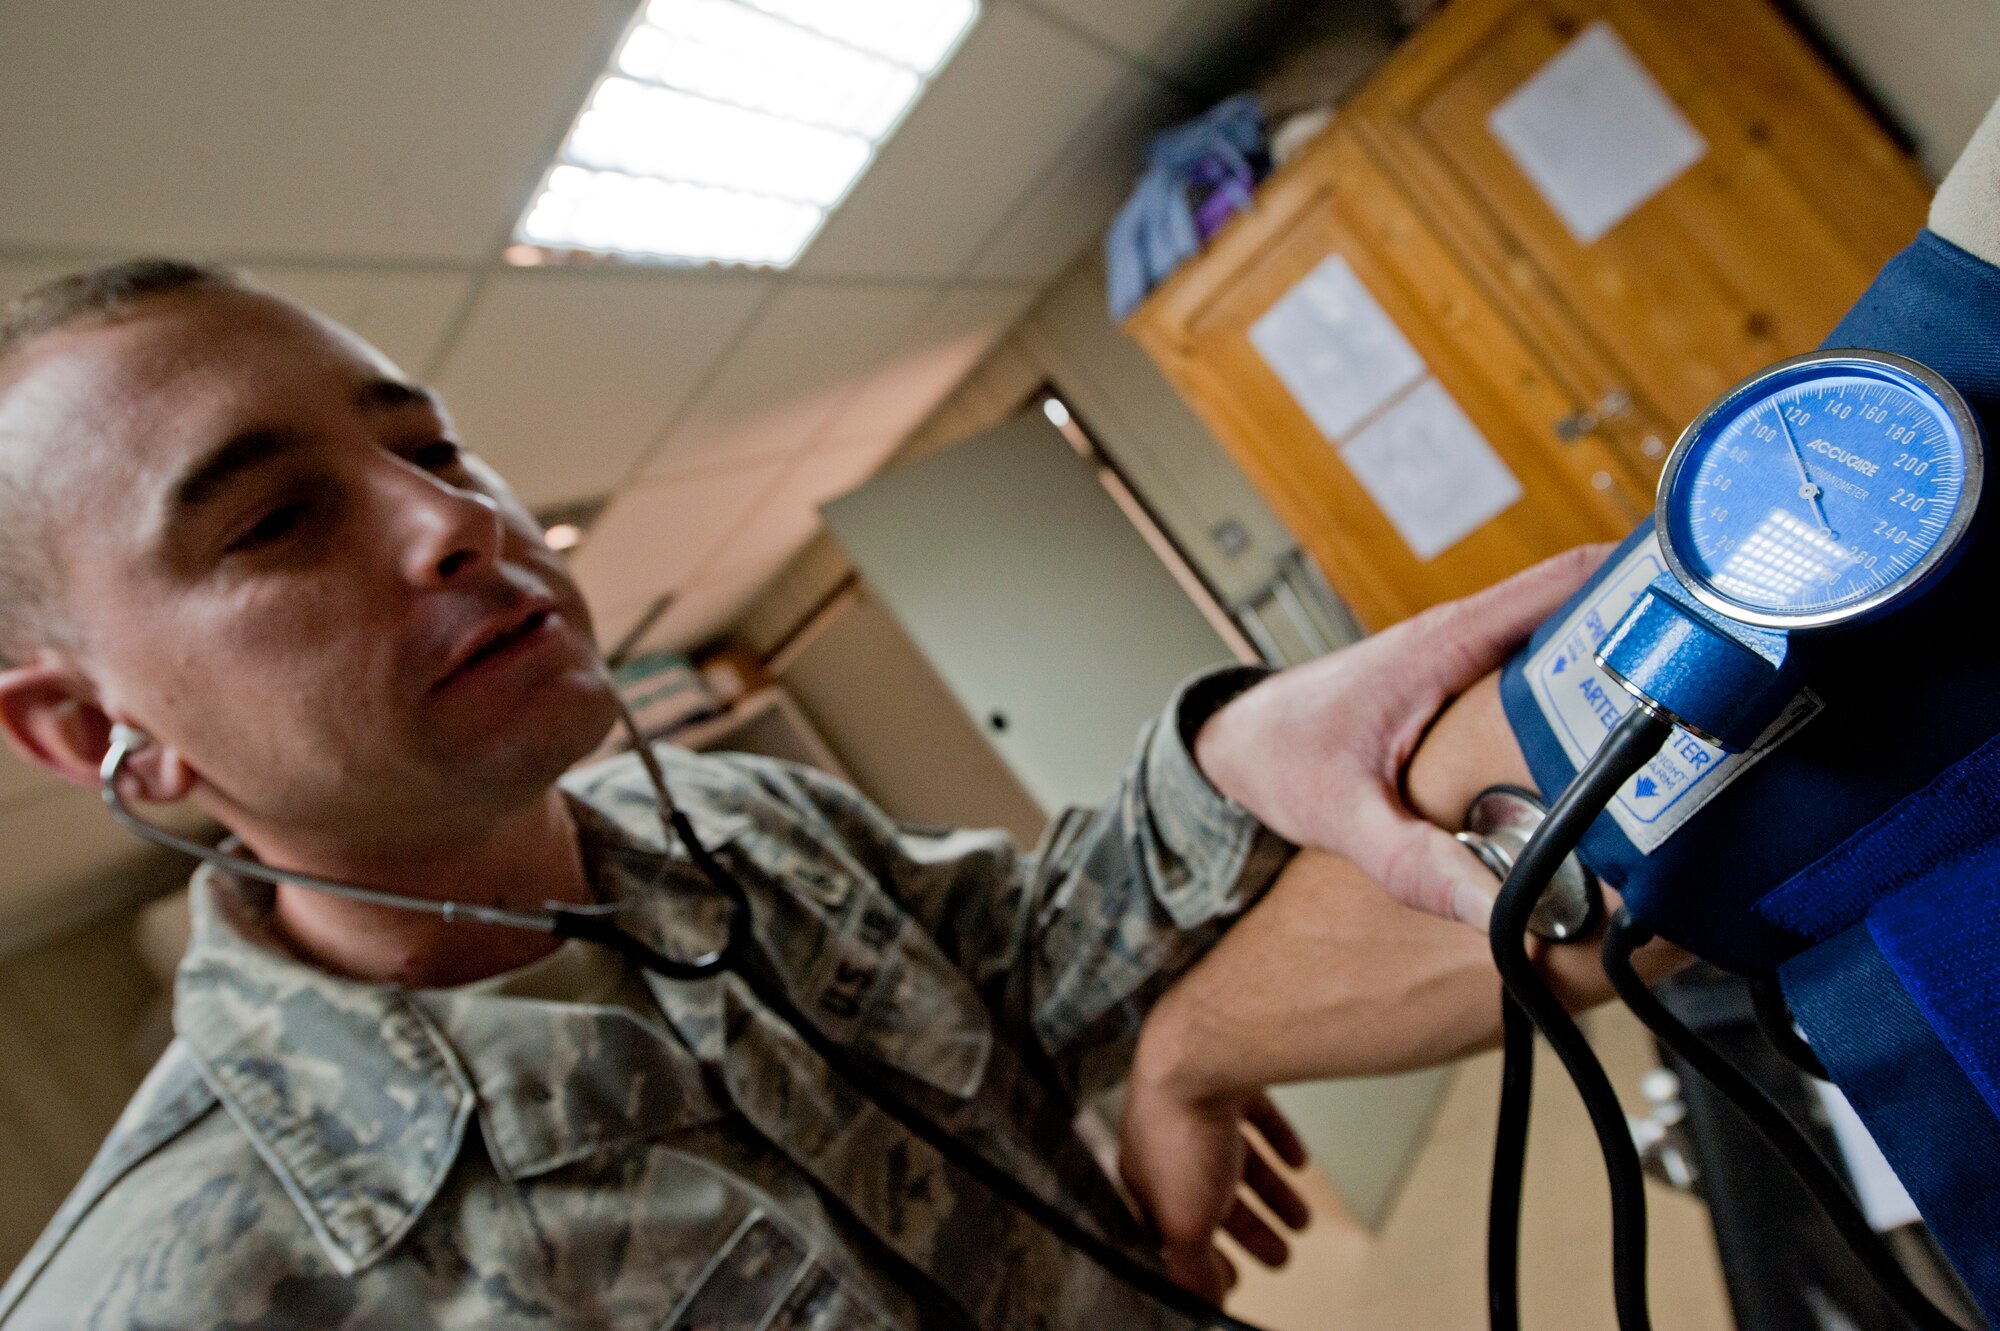 Tech. Sgt. Brian Schmit, 332nd Expeditionary Medical Group medical technician, checks the blood pressure of a patient in an undisclosed location in Southwest Asia, Jan 19, 2012. Schmit uses a stethoscope to listen to the flow of blood during the exam.  Schmit is deployed from Spangdahlem Air Base, Germany, and is a native of Rogers Ark. (U.S. Air Force photo by Staff Sgt. Joshua J. Garcia/Released)